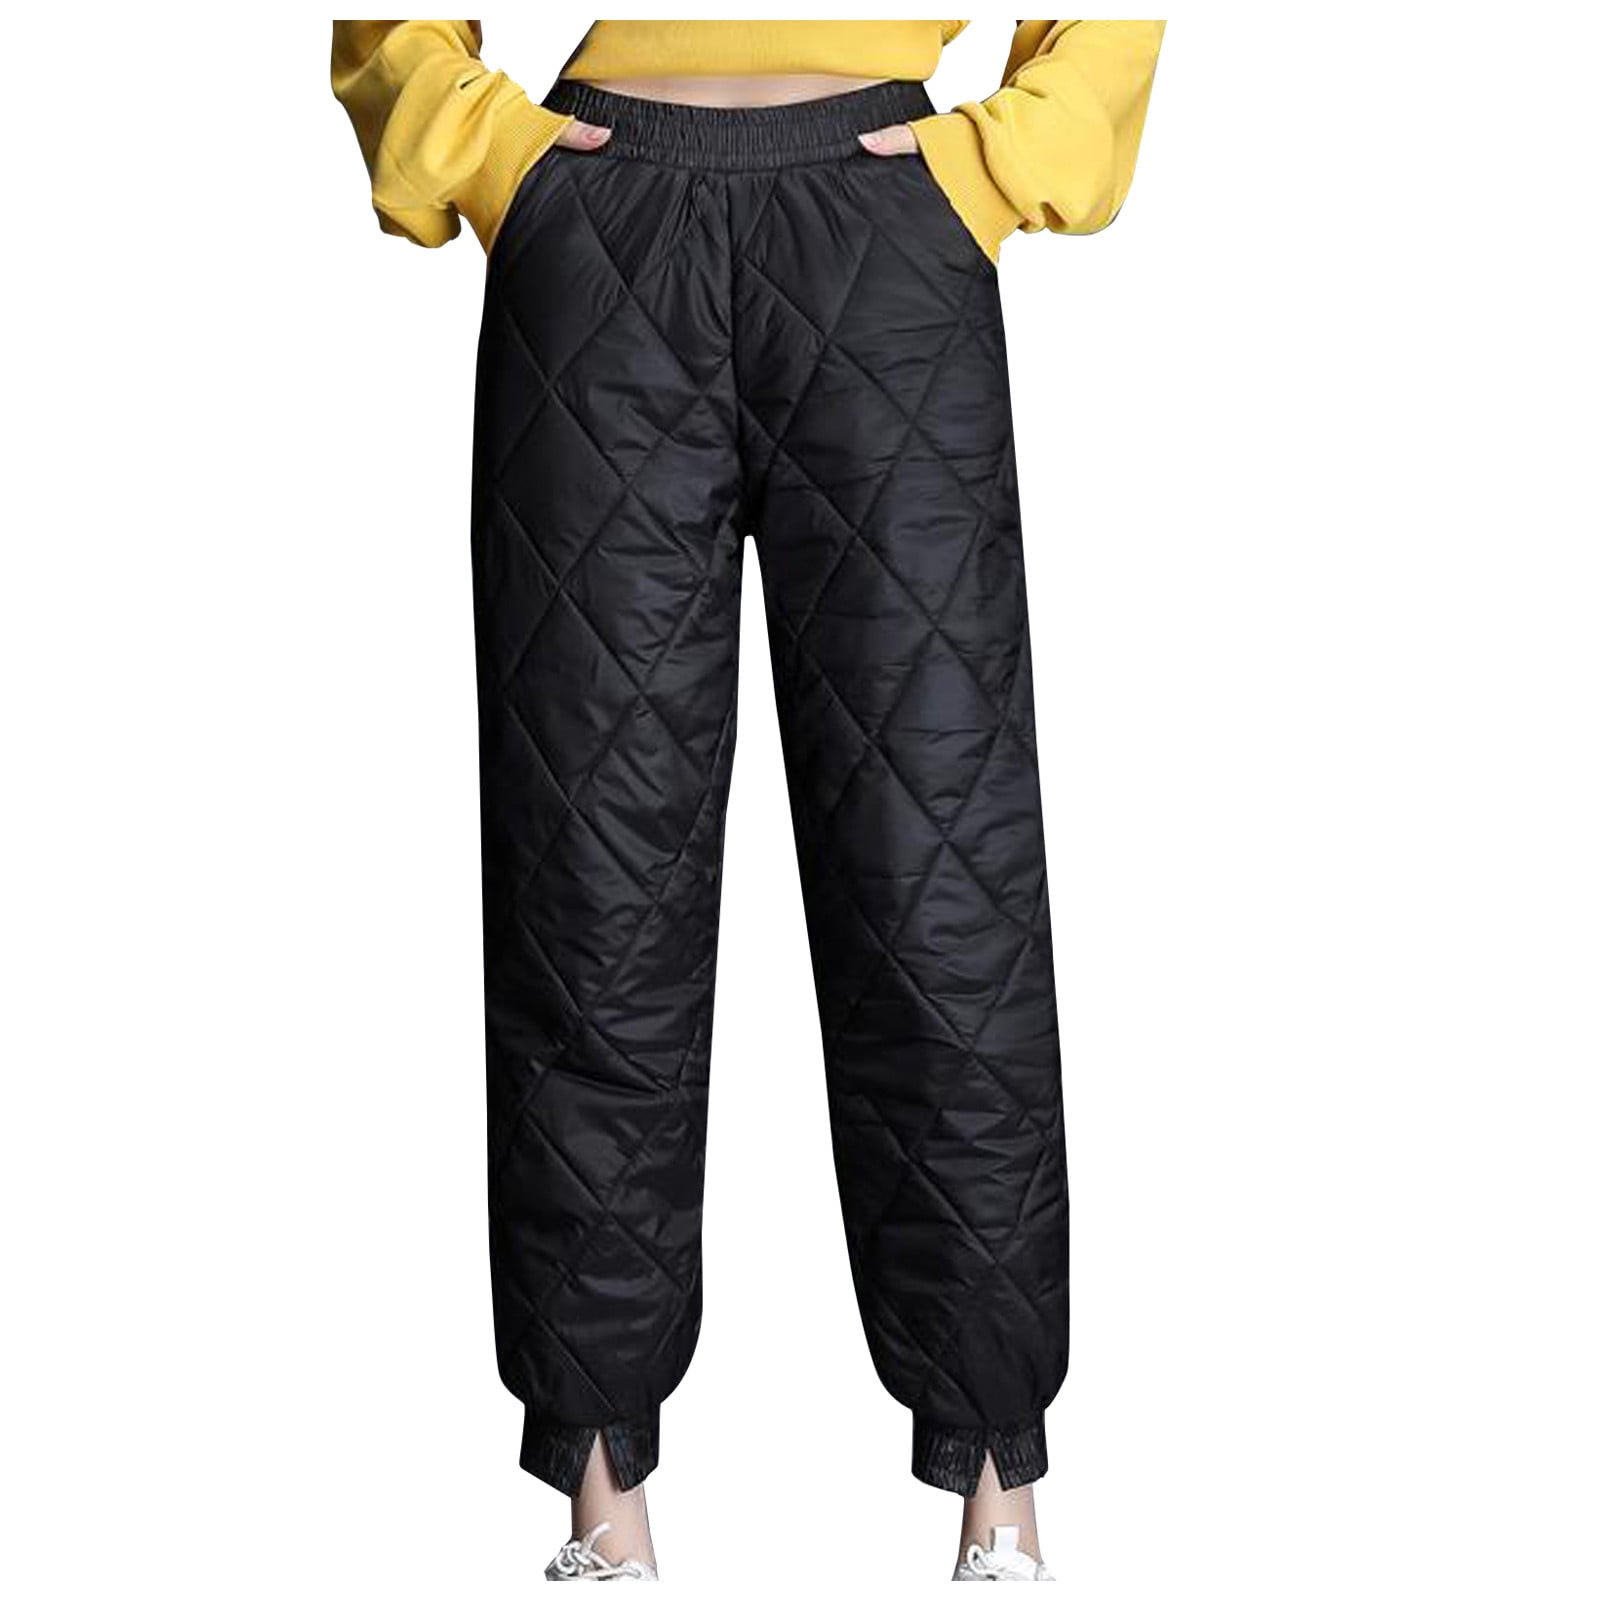 RQYYD Women's Lightweight Puffy Pants Elastic High Waist Quilted